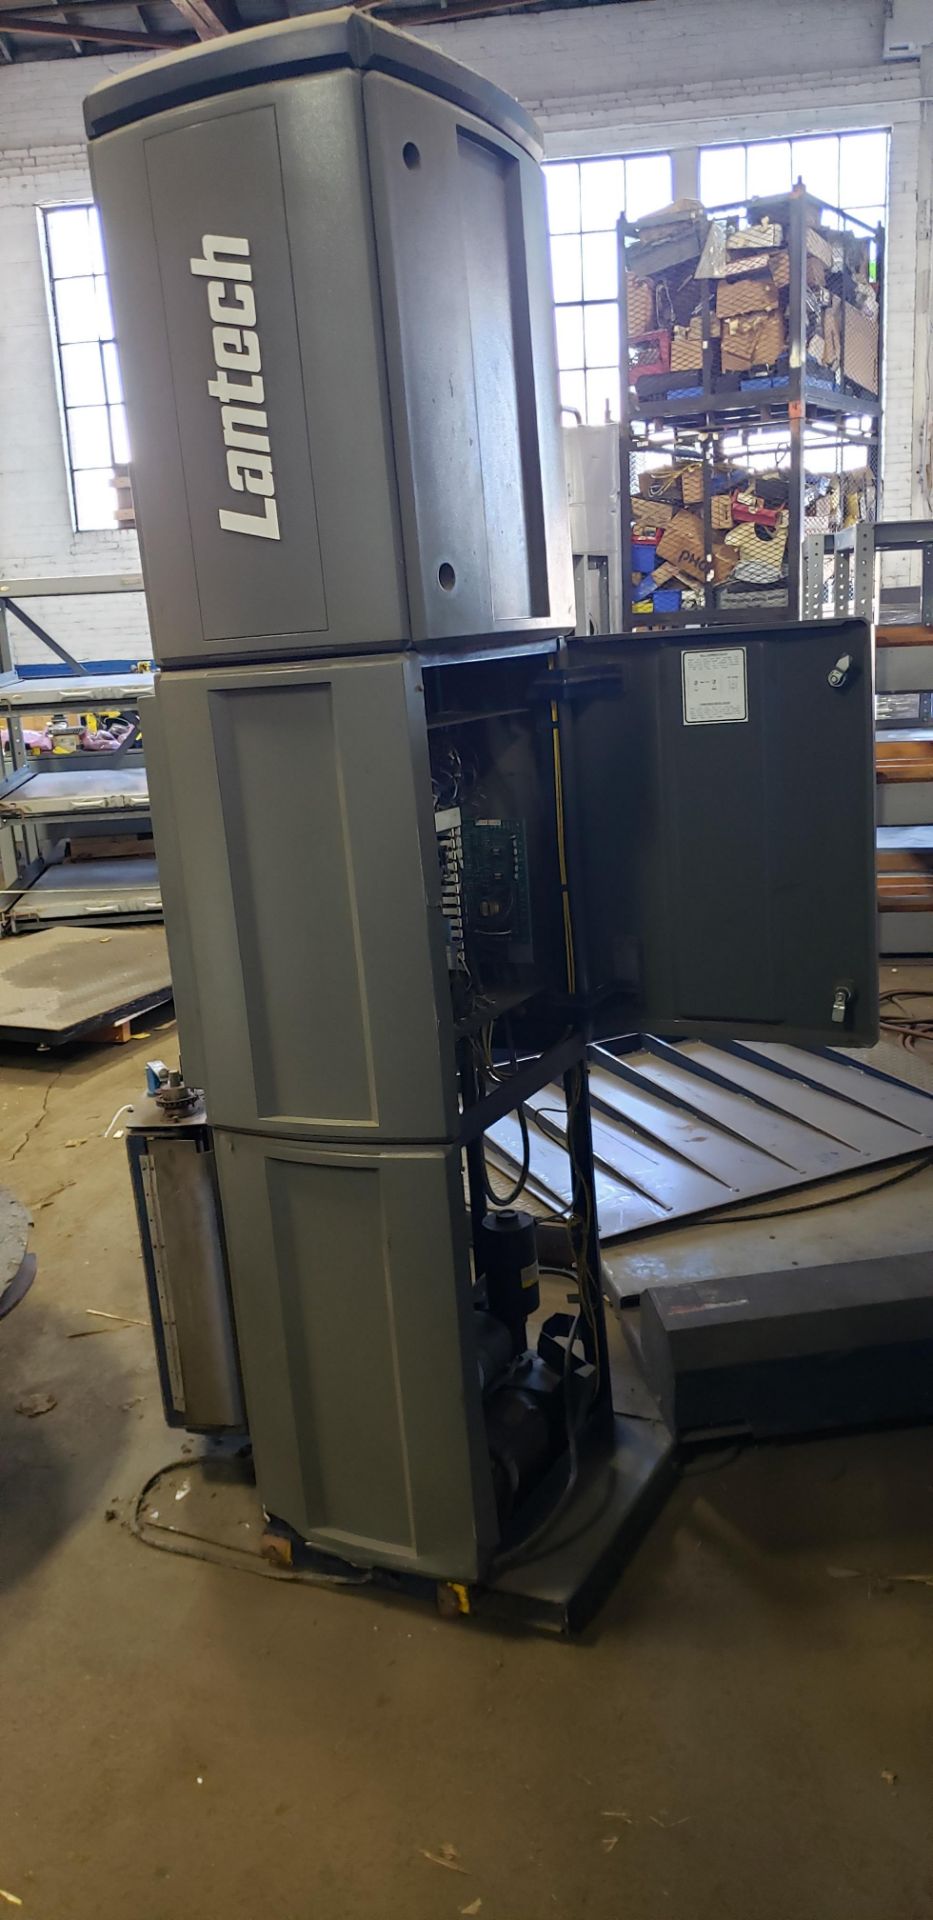 LANTECH Q SERIES SHRINK WRAP MACHINE WITH EXTRA PLATFORM- NEEDS V BELT ***THIS ITEM LOCATED AT GROS - Image 6 of 8